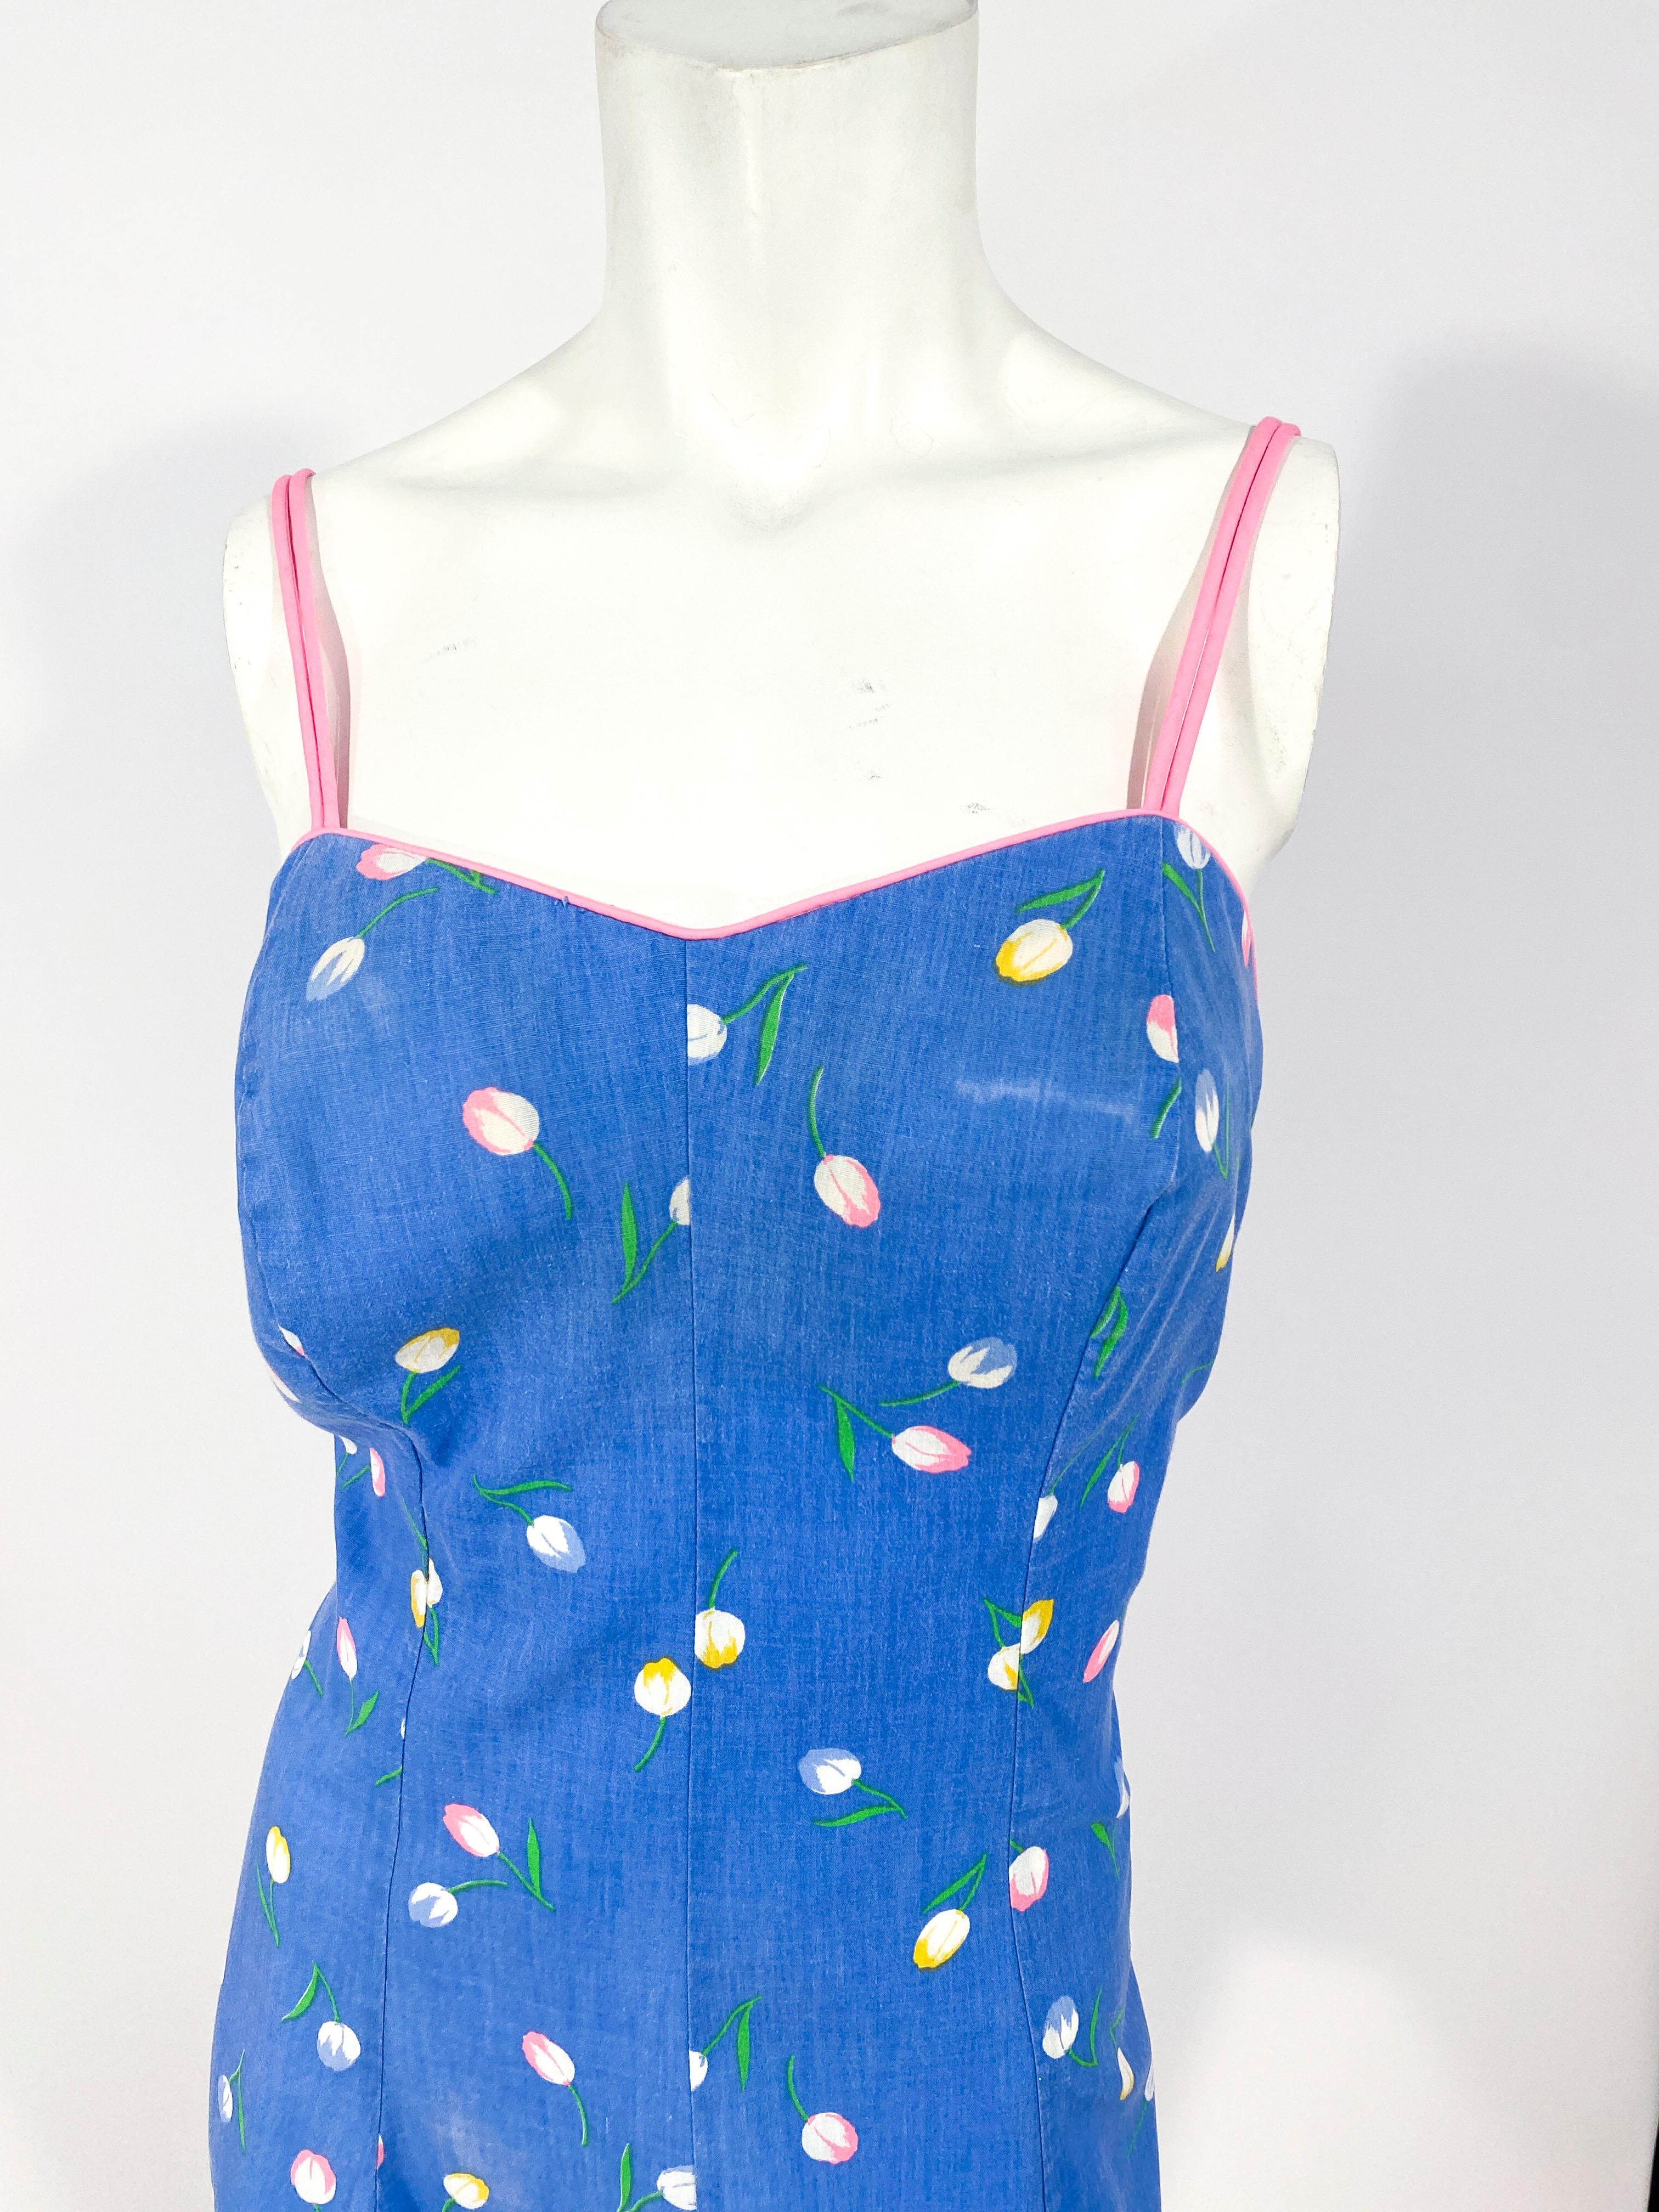 1950s mini sun dress featuring a pink and yellow tulip print on a periwinkle background. The structured bodice is timed in a hot pink piping and the torso is ruched for comfort and give.